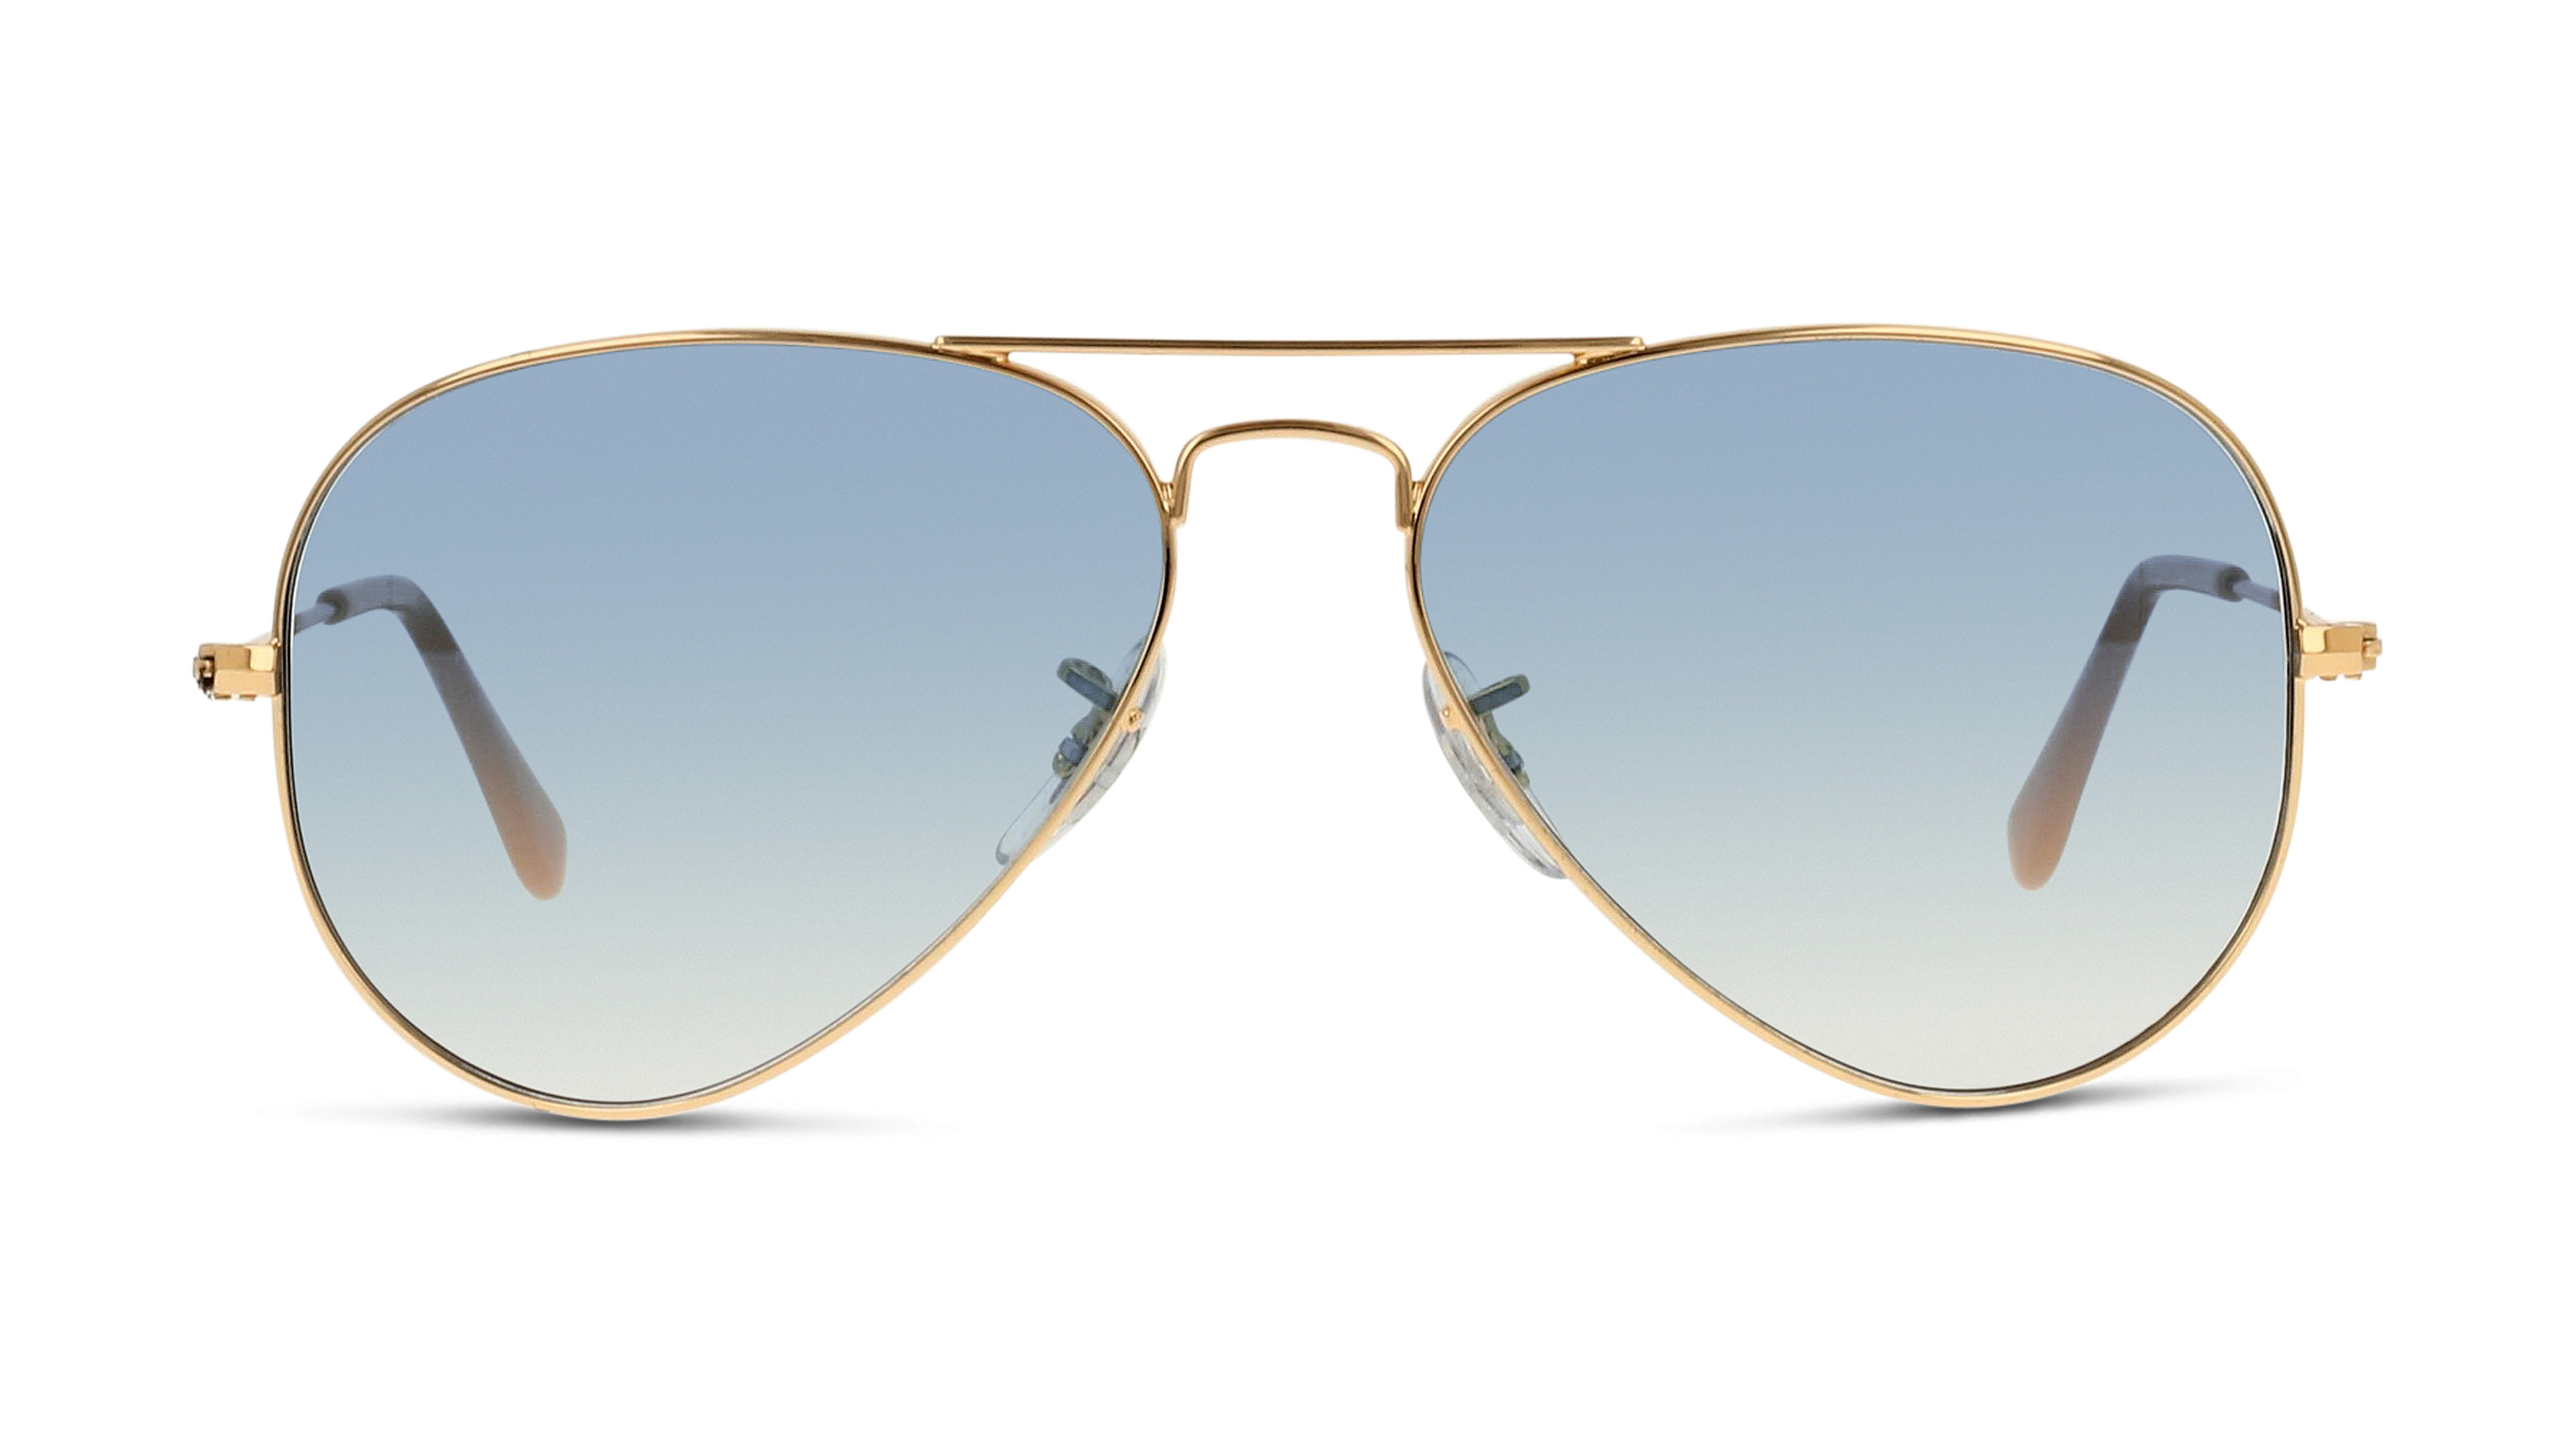 [products.image.front] Ray-Ban AVIATOR LARGE METAL 0RB3025 001/3F Sonnenbrille